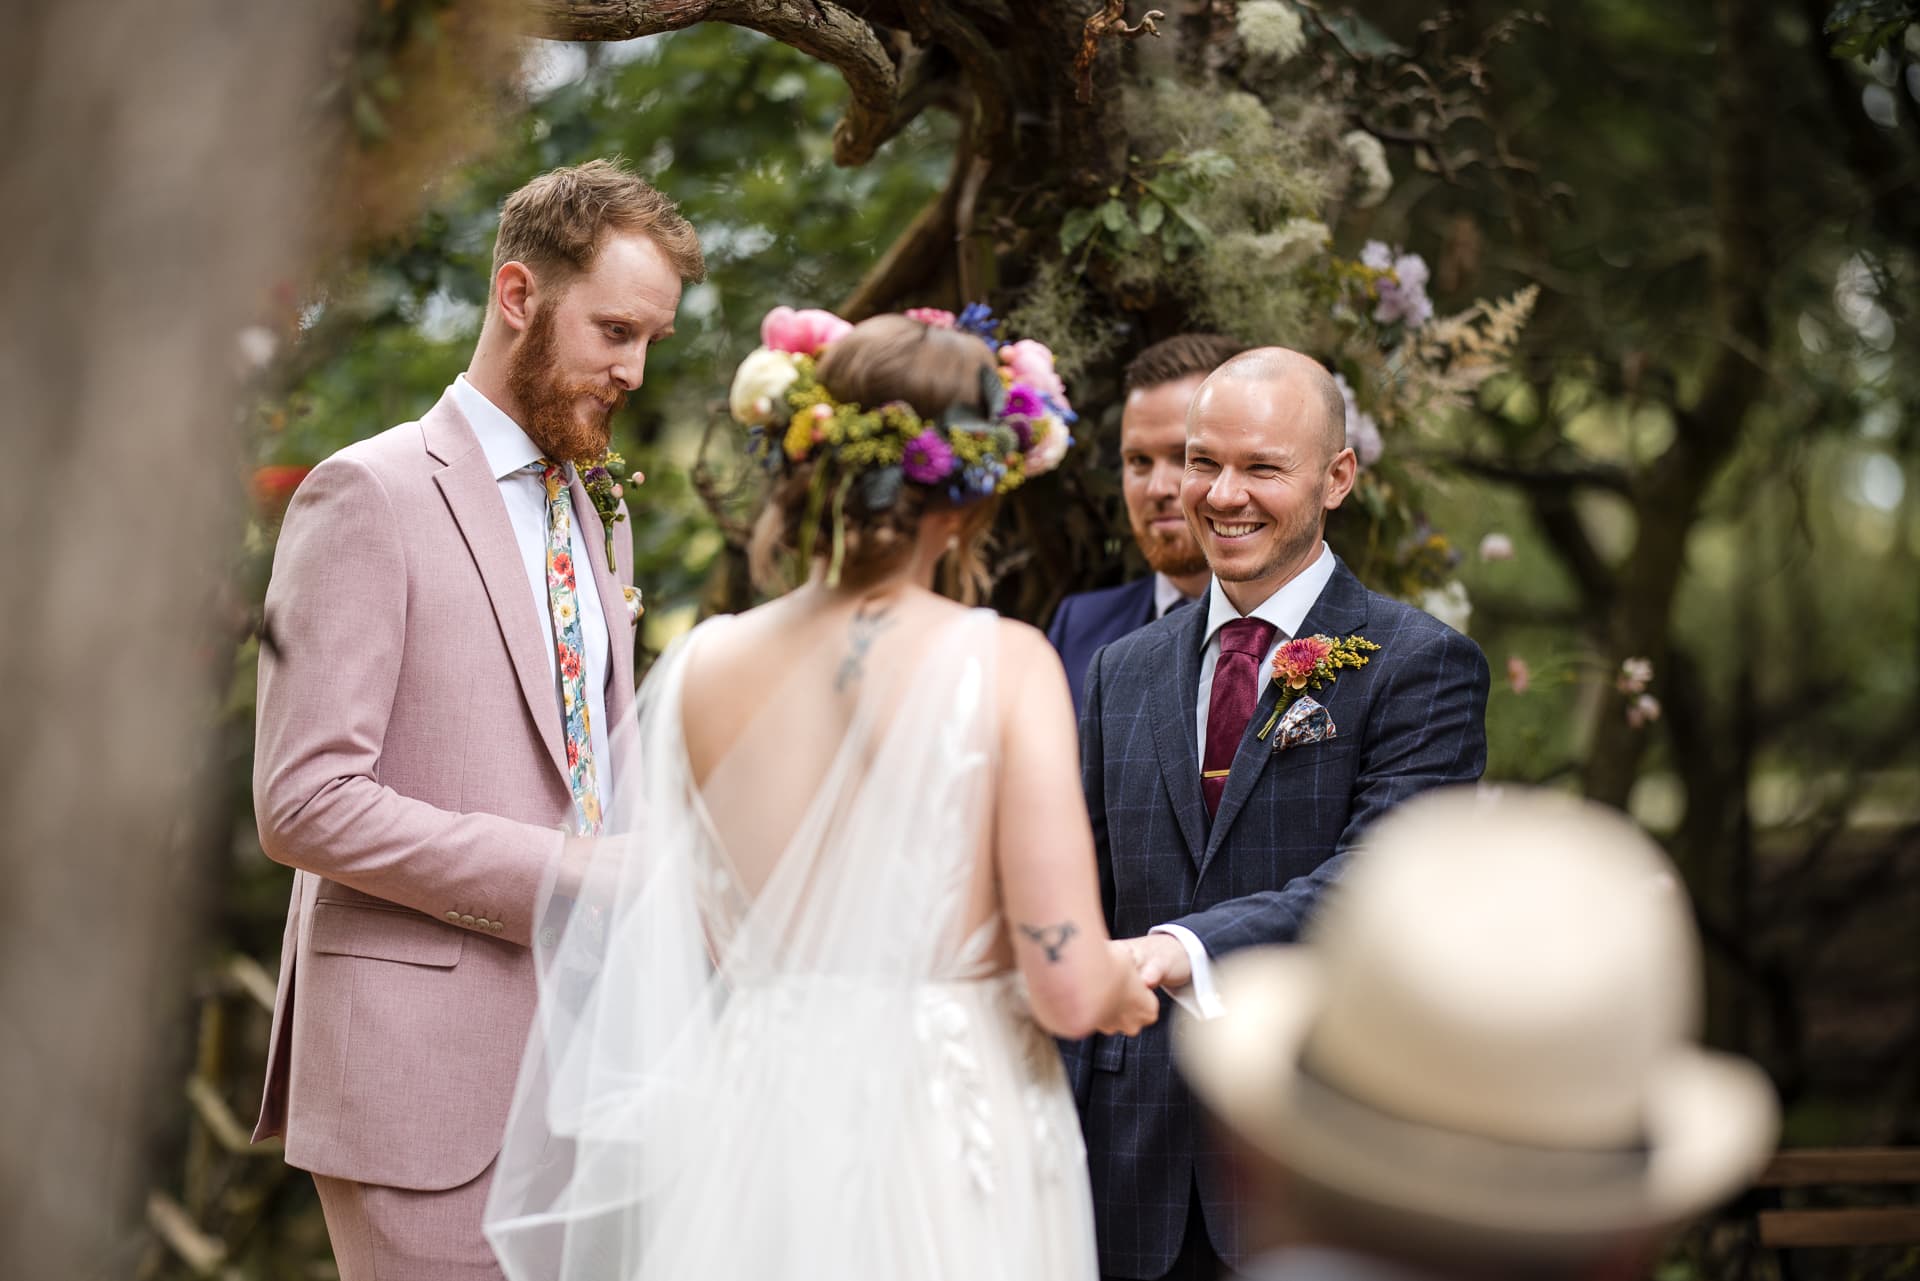 Groom smiling to his bride during outdoor wedding at the Endeavour Woodland wedding venue